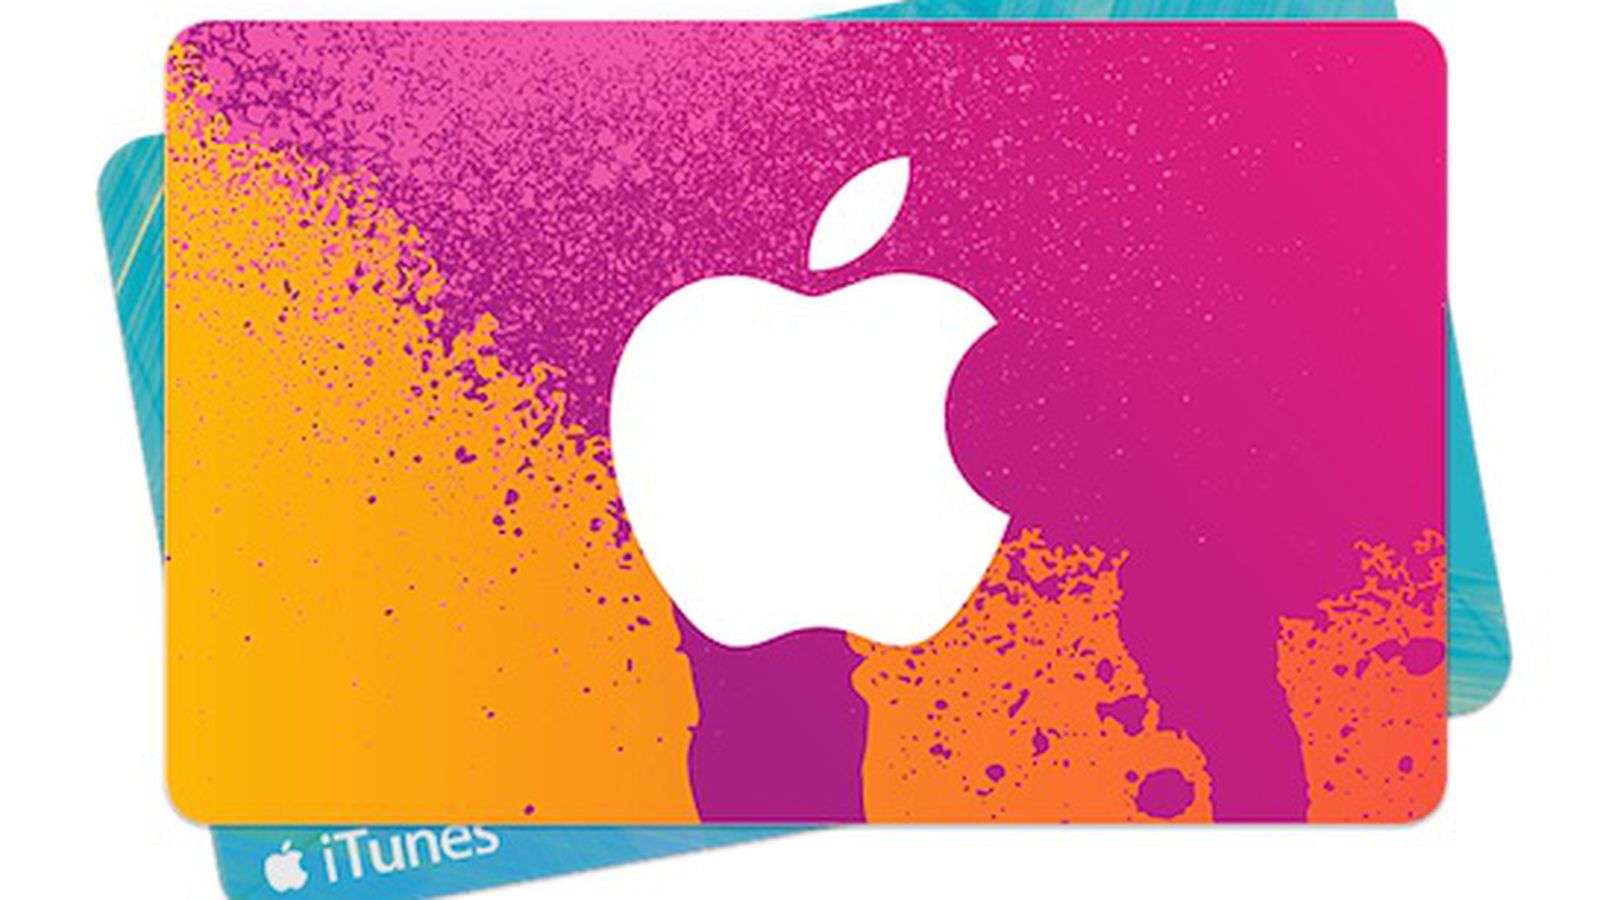 Has $50 iTunes Gift Cards on Sale Right Now for $42.50 - MacRumors